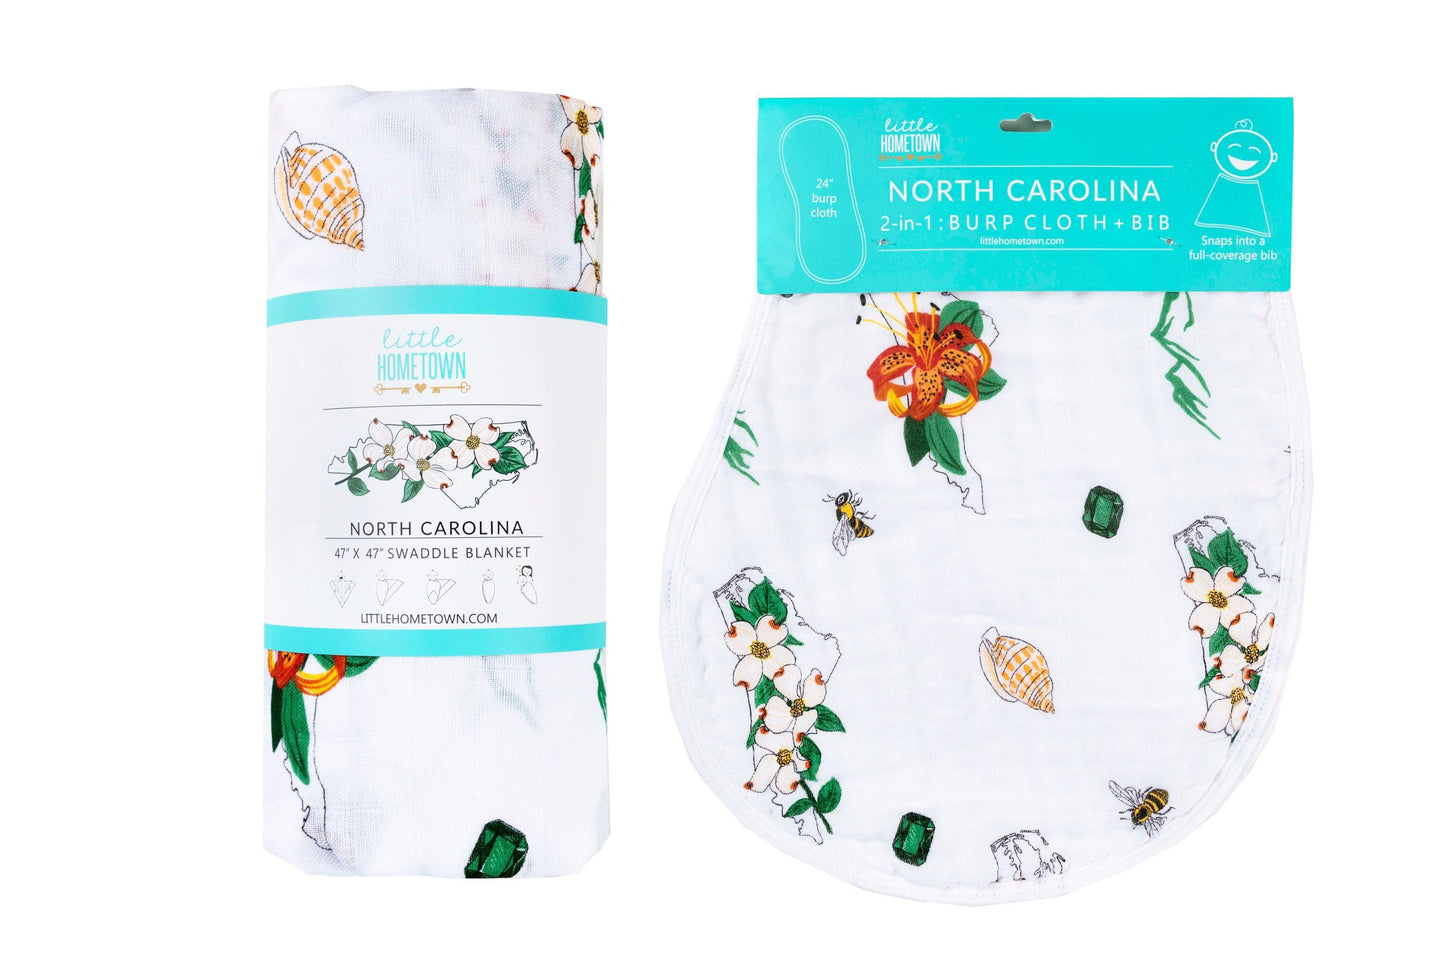 North Carolina-themed baby gift set with floral muslin swaddle blanket and matching burp cloth/bib combo.